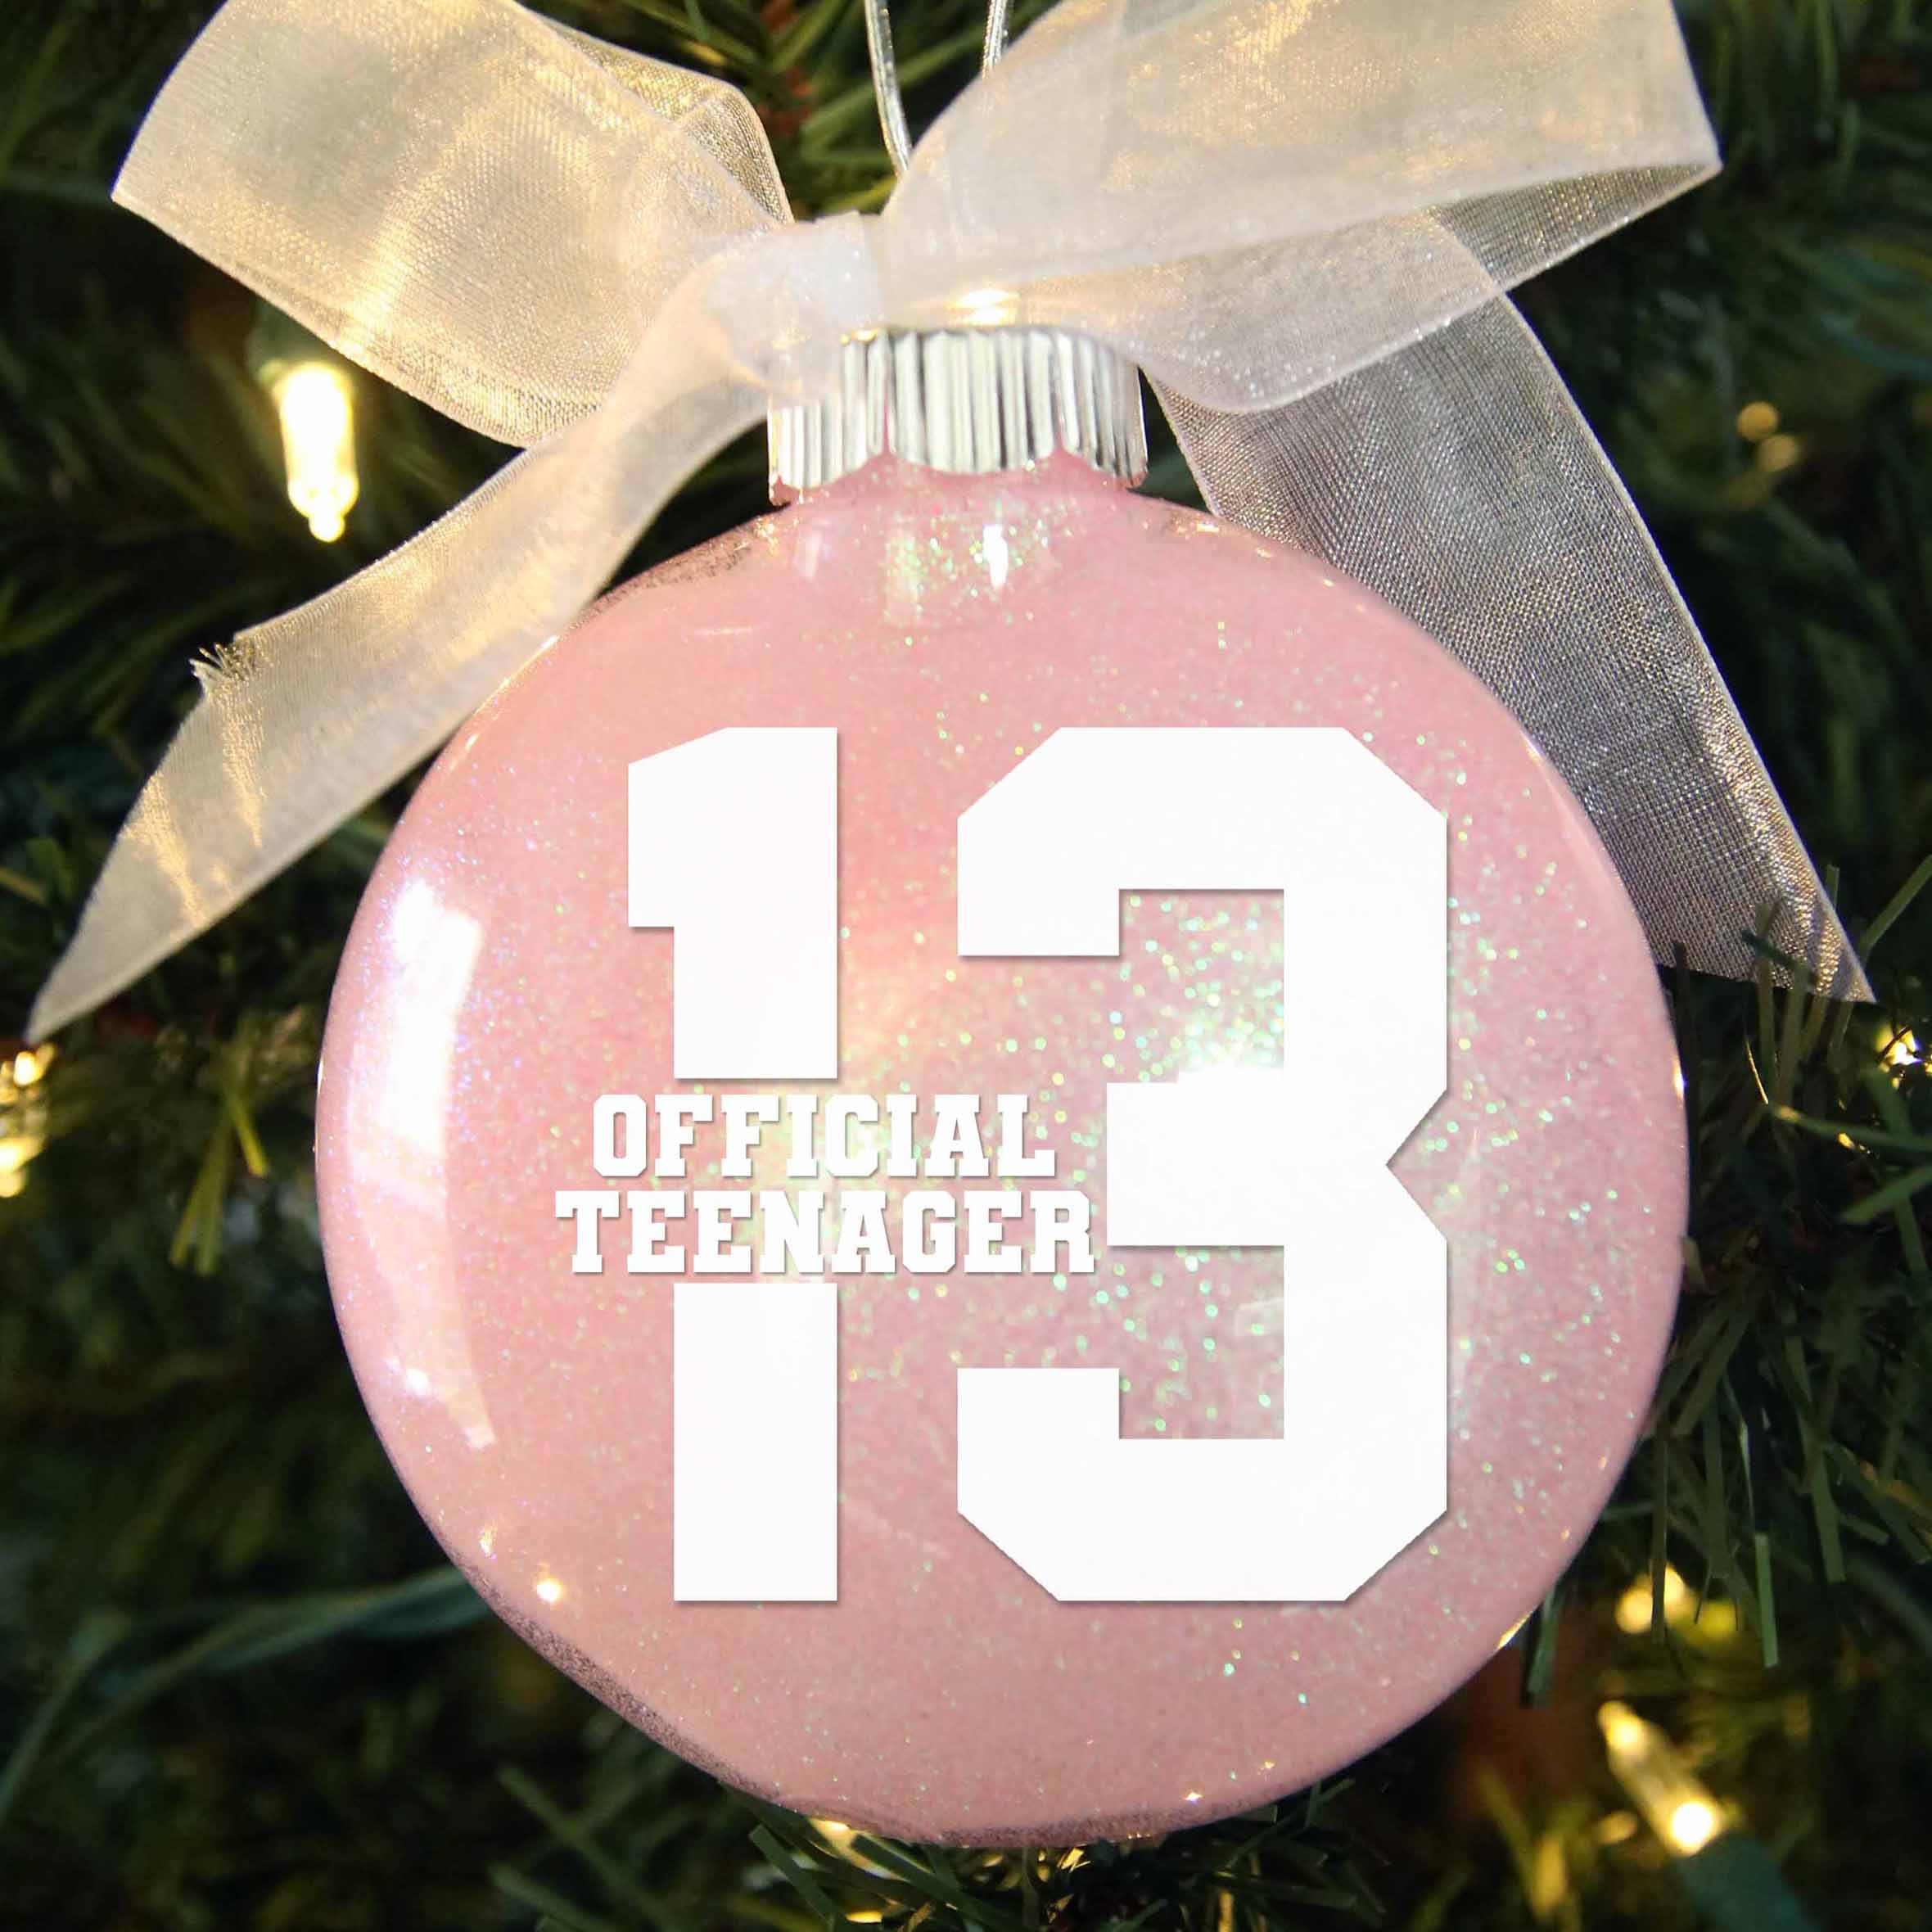 13 Official Teenager Birthday Ornament in light pink glitter